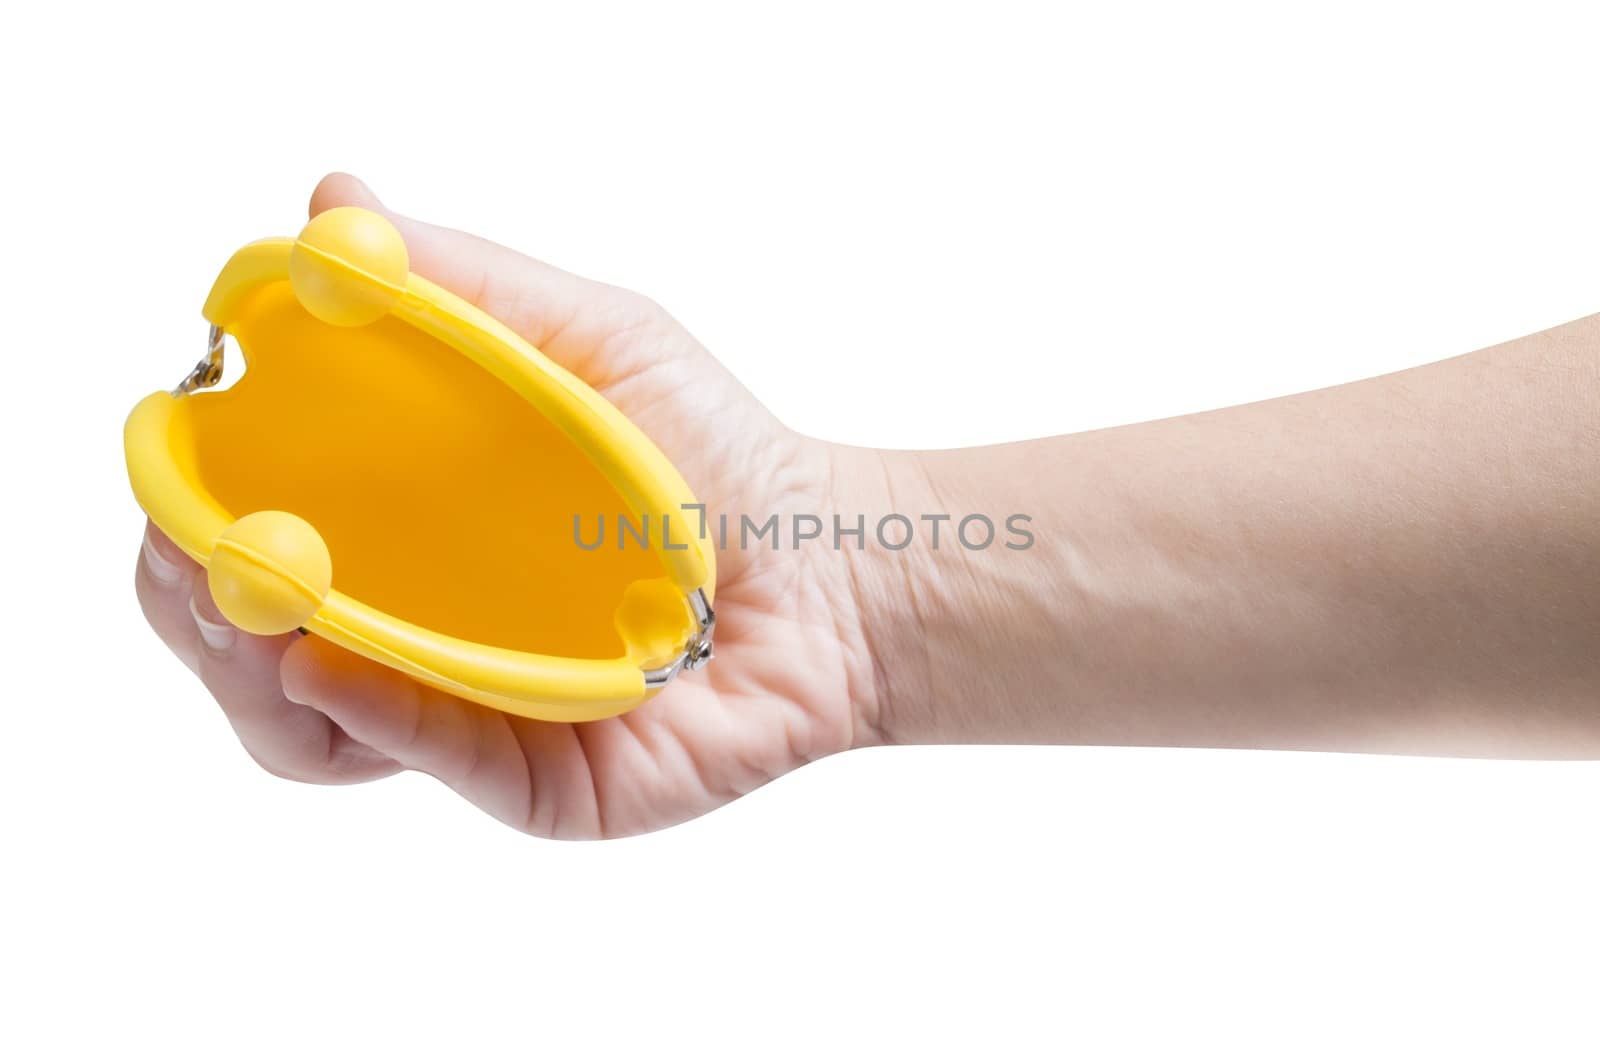 Hand holding an empty coin purse, white background.

